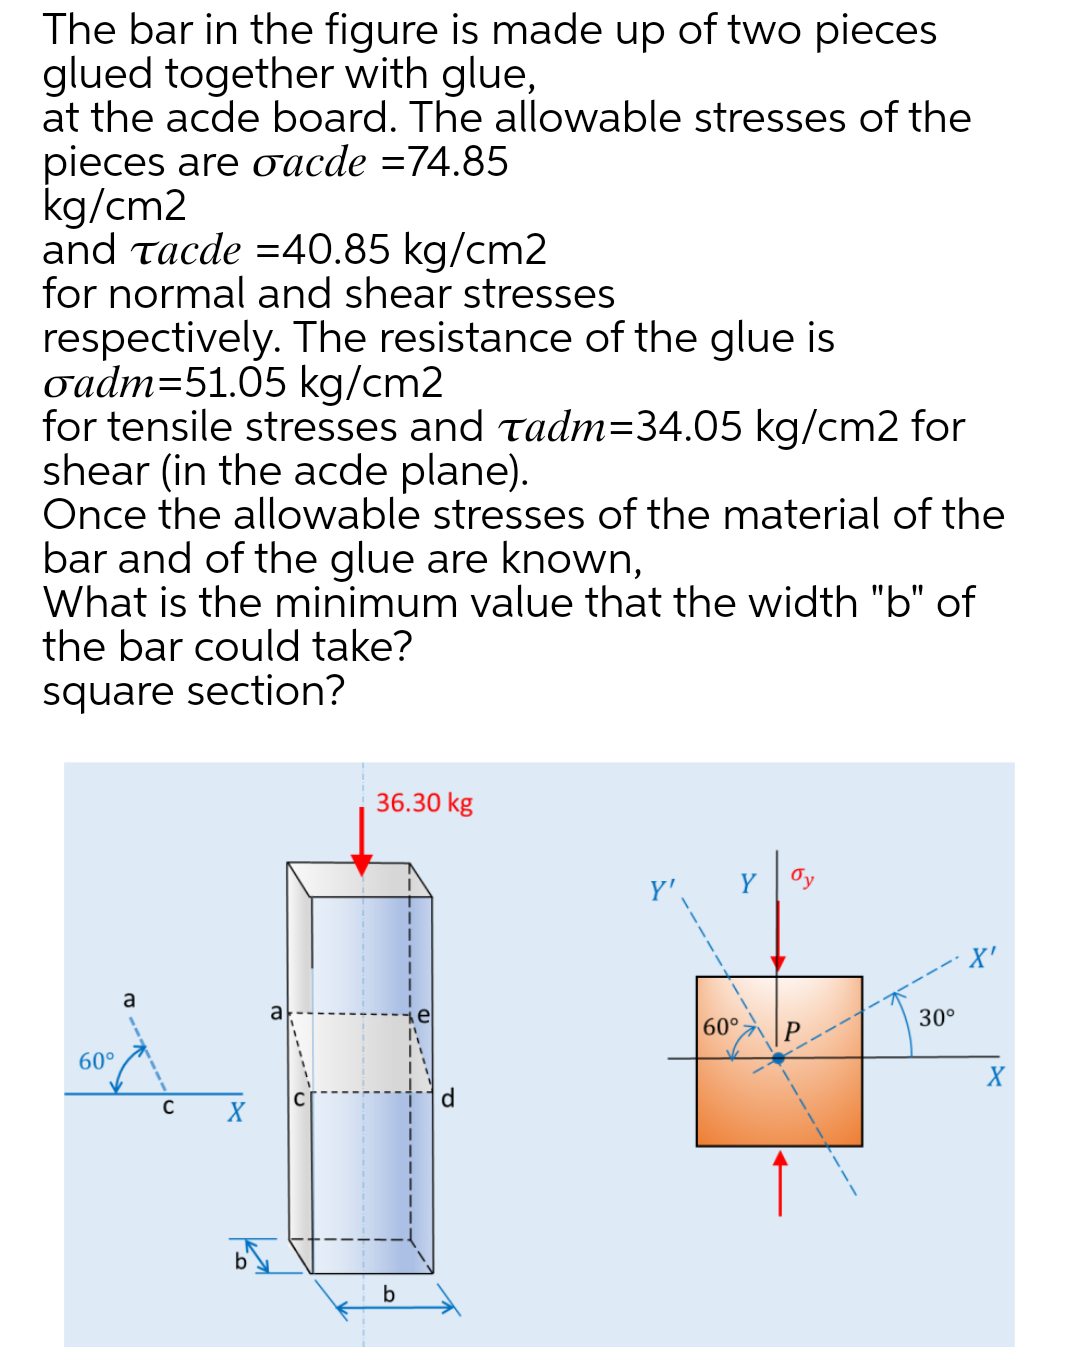 The bar in the figure is made up of two pieces
glued together with glue,
at the acde board. The allowable stresses of the
pieces are oacde =74.85
kg/cm2
and tacde =40.85 kg/cm2
for normal and shear stresses
respectively. The resistance of the glue is
oadm=51.05 kg/cm2
for tensile stresses and Tadm=34.05 kg/cm2 for
shear (in the acde plane).
Once the allowable stresses of the material of the
bar and of the glue are known,
What is the minimum value that the width "b" of
the bar could take?
square section?
36.30 kg
Oy
X'
a
a
30°
60°
P
60°
d
b
